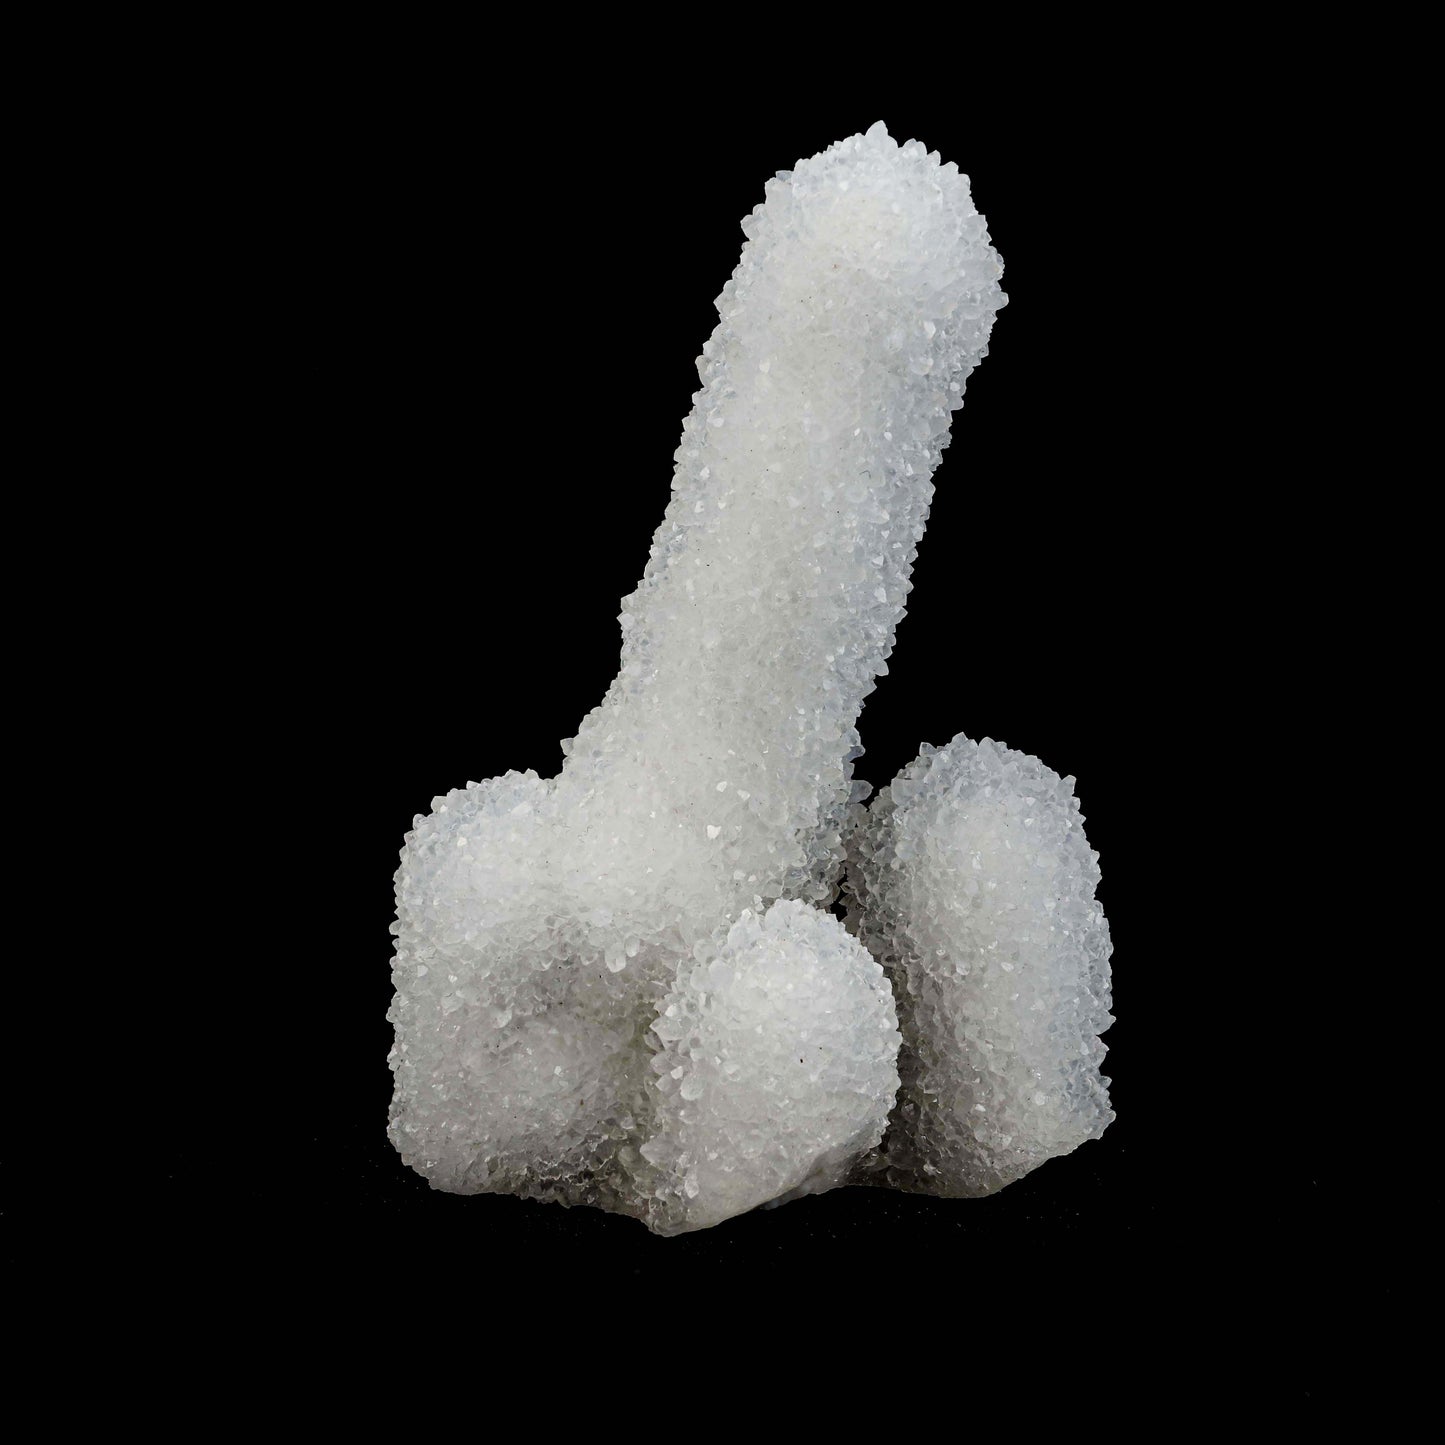 MM Quartz Coral Formation Natural Mineral Specimen # B 4996  https://www.superbminerals.us/products/mm-quartz-coral-formation-natural-mineral-specimen-b-4996  Features:&nbsp;The specimen is made up of drusy milky Quartz that has pseudomorphed following scalenohedral Calcite crystals.The item is crystallised nearly all the way around, with no matrix and only a few small points of attachment, and is thus on the verge of becoming a complete "floater."This type of specimen